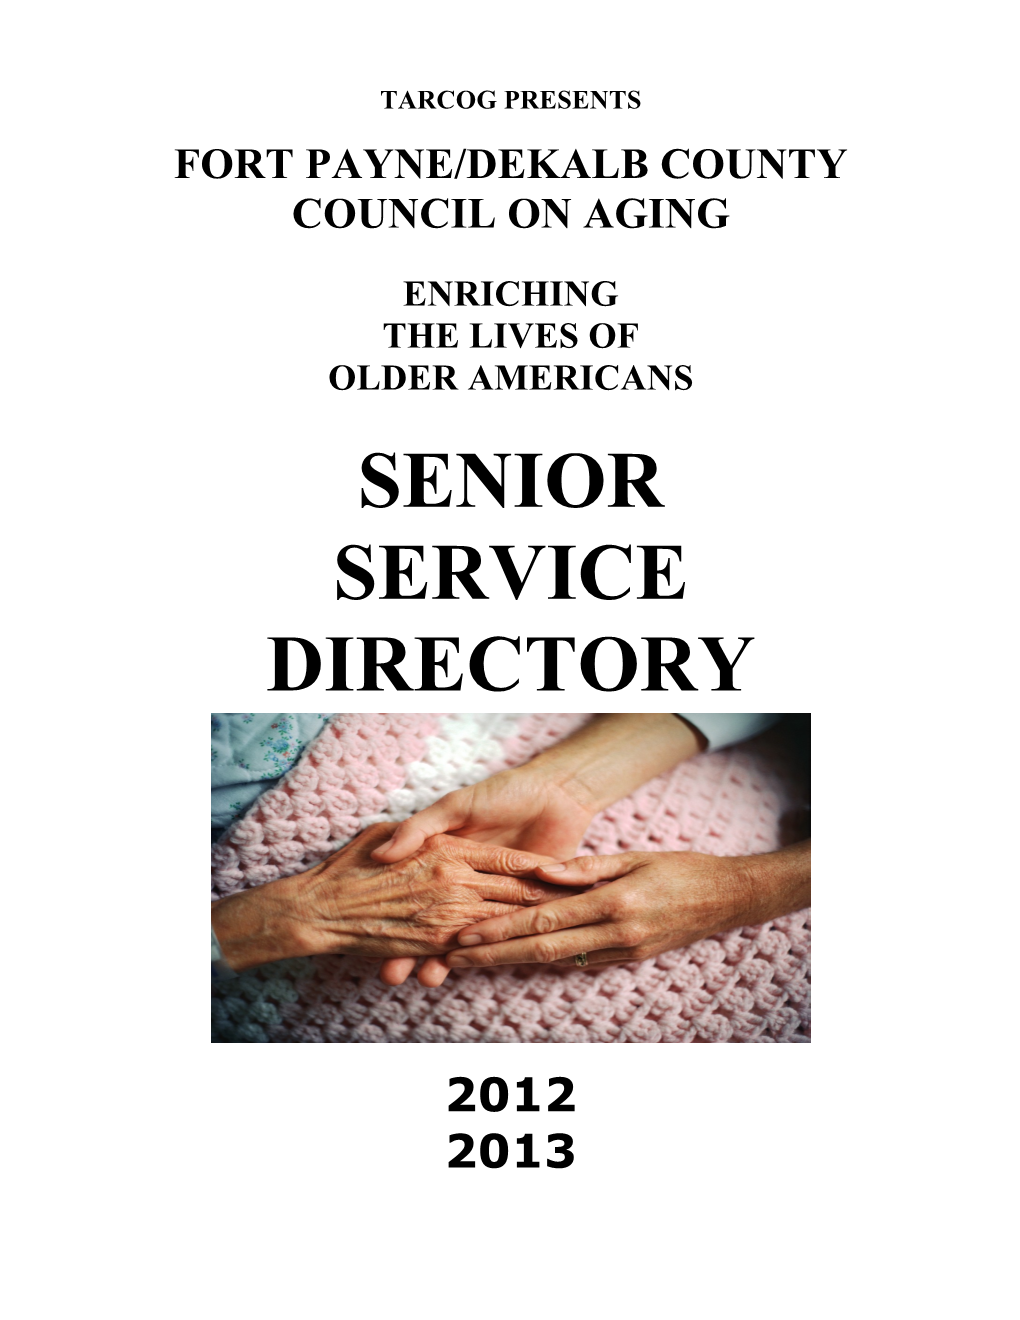 Fort Payne/Dekalb County Council on Aging